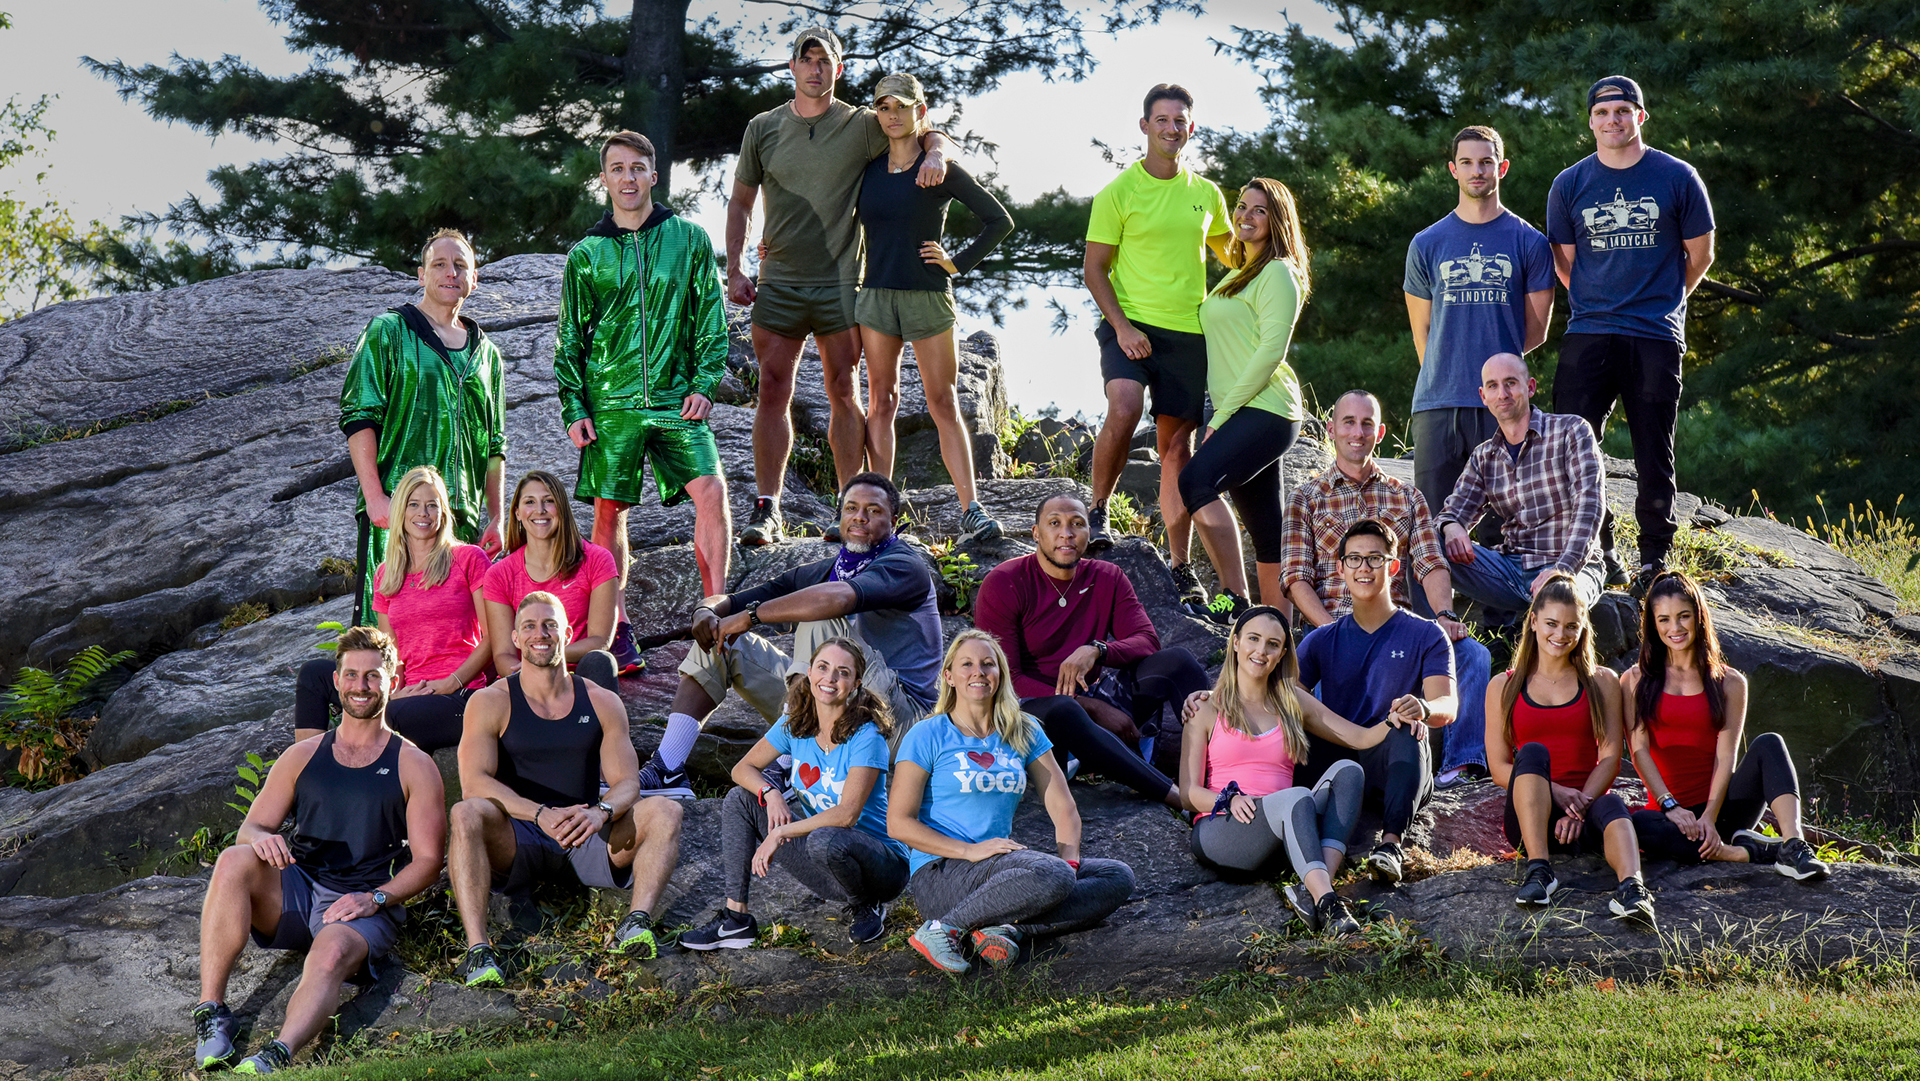 The Amazing Race has its Season 30 premiere on Wednesday, Jan. 3 at 8/7c.